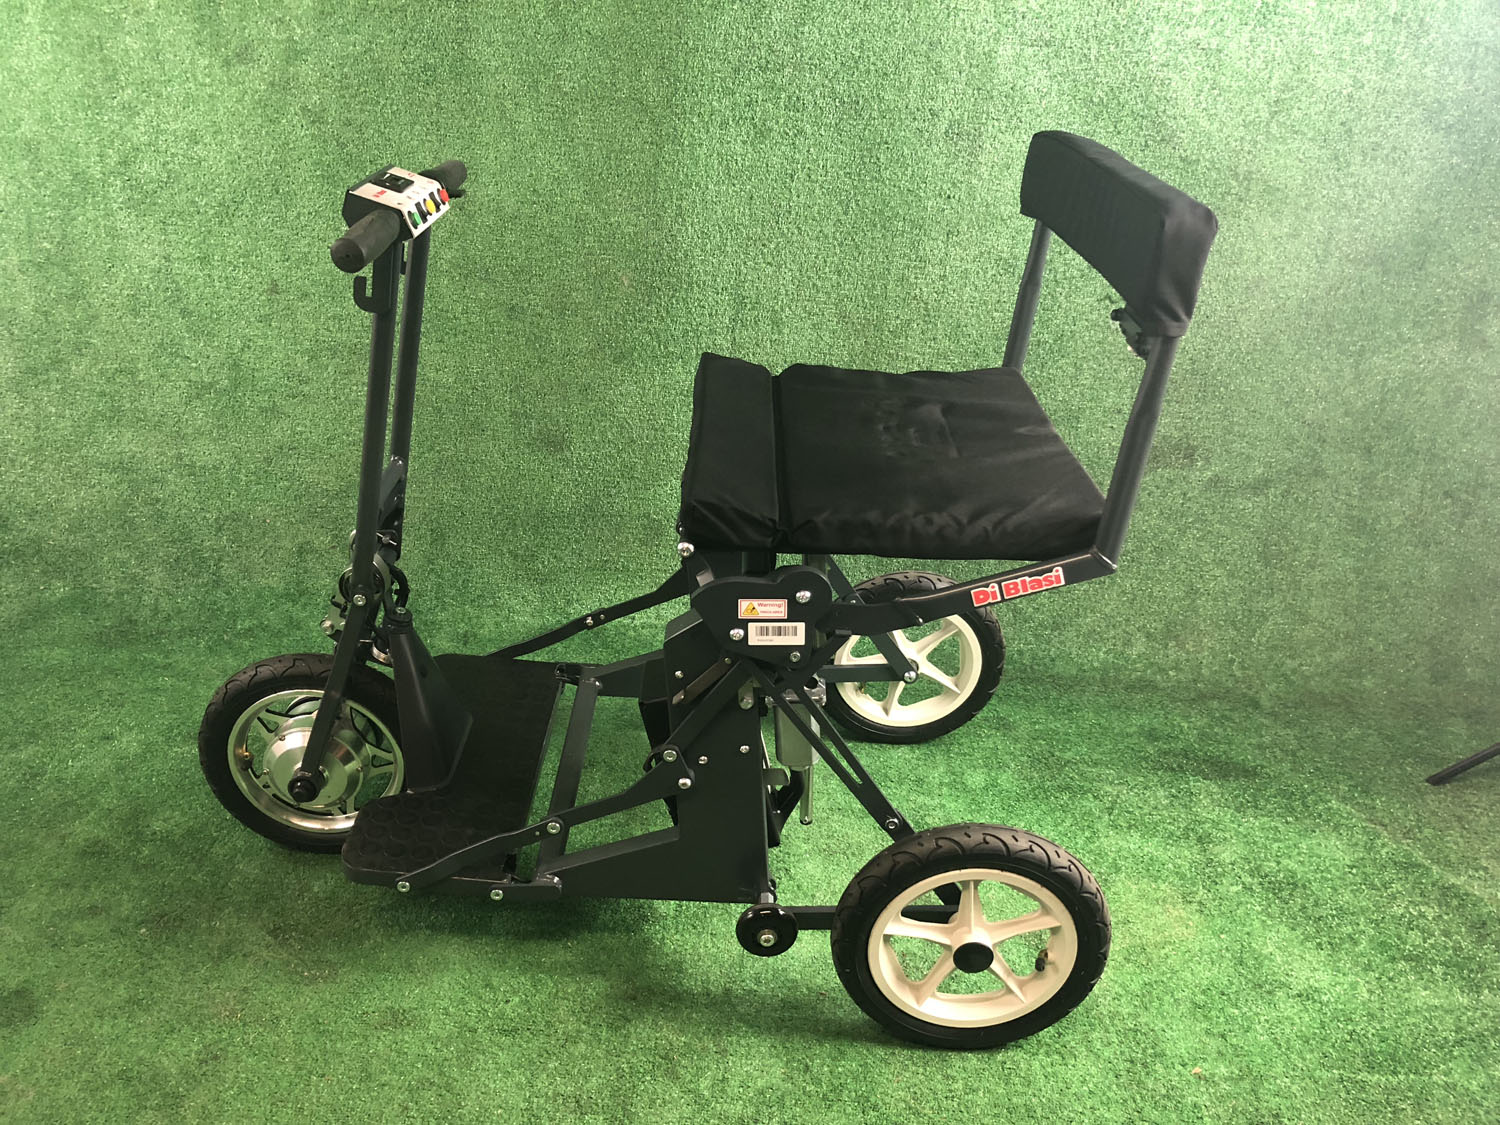 New DiBlasi R30 Automatic Folding Lightweight Mobility Scooter with Lithium Battery